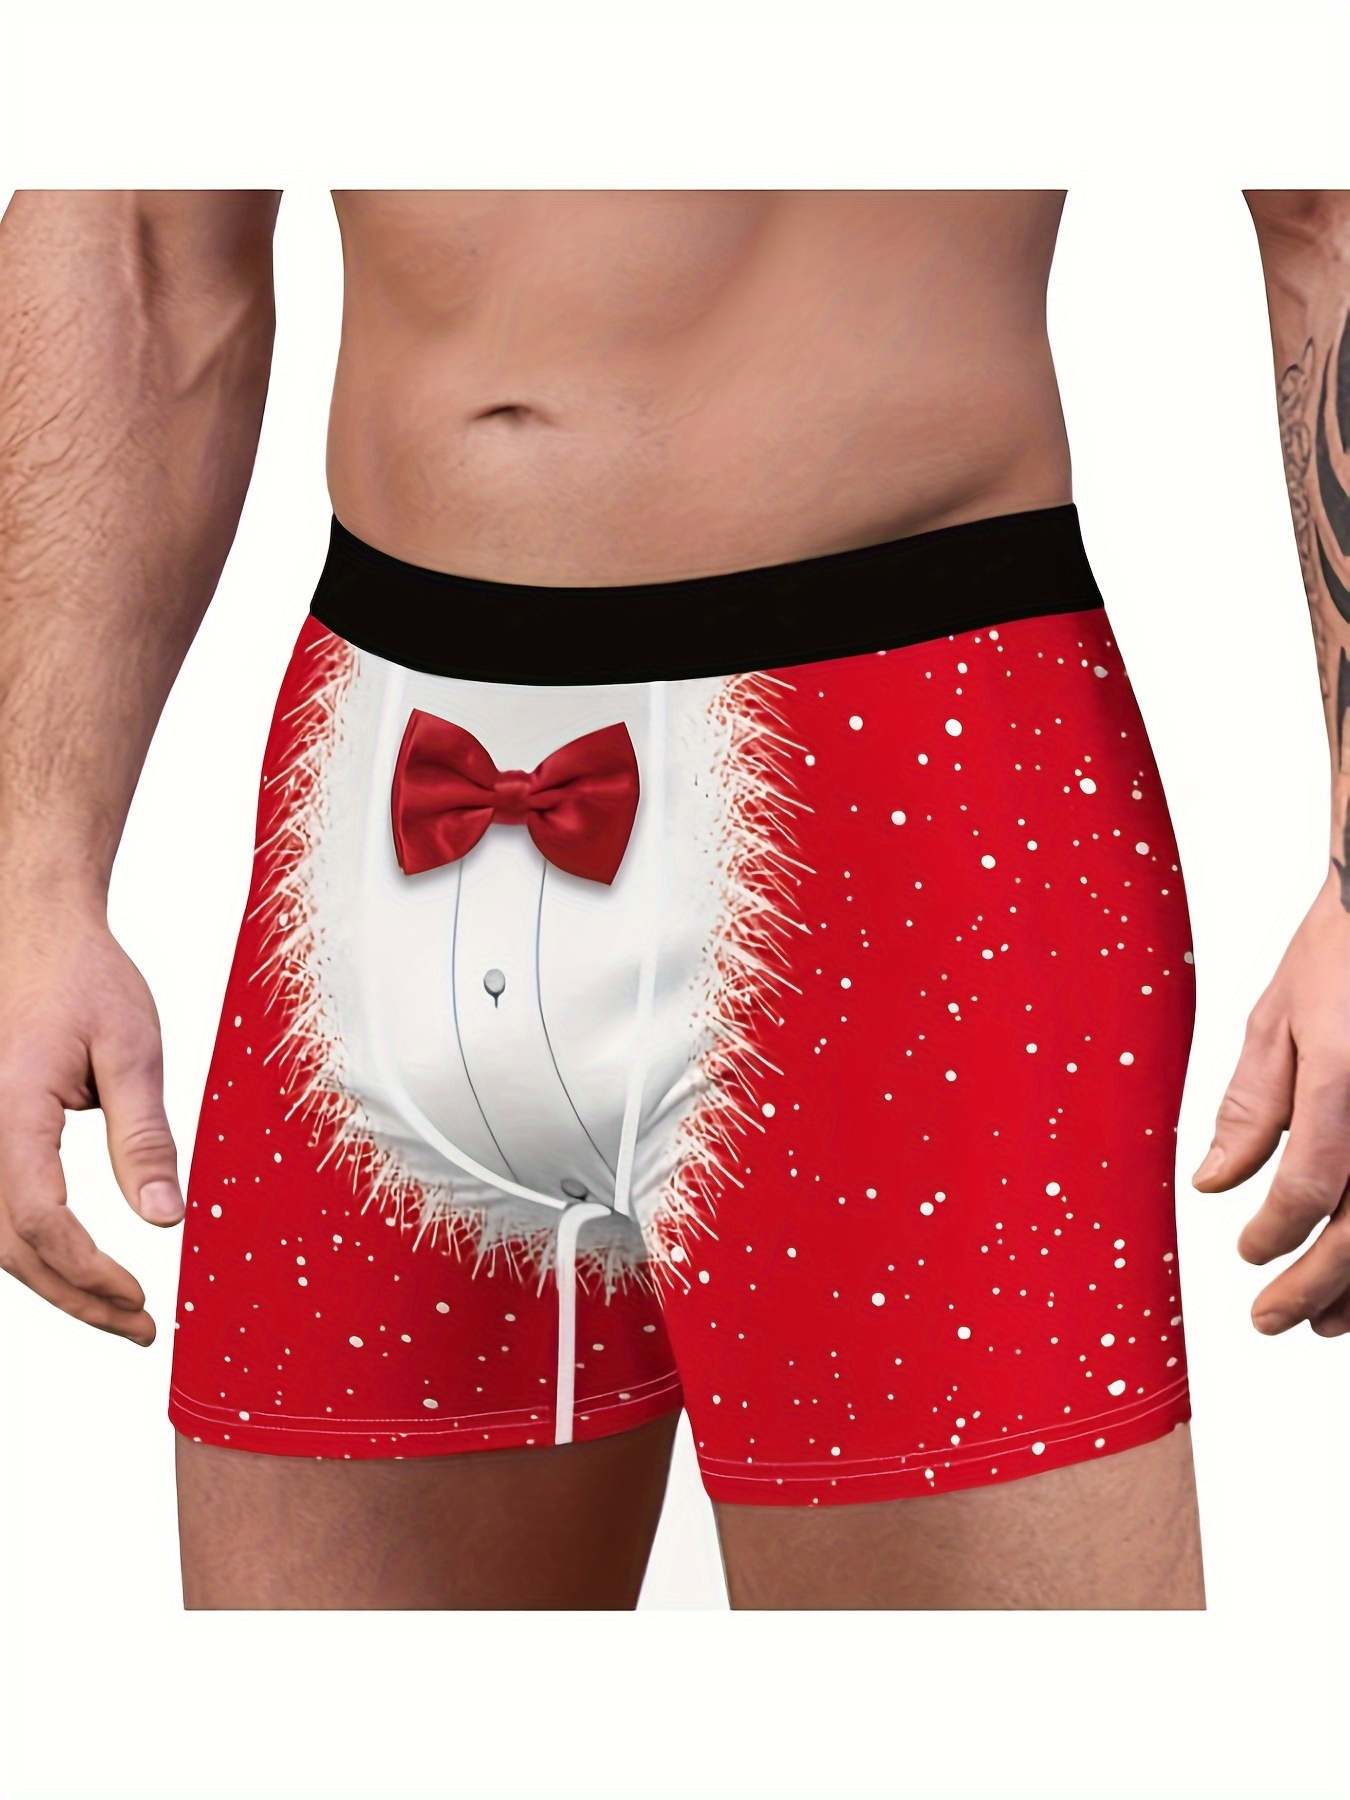 Christmas Boxer Shorts, Boxer Shorts Christmas, Mens Christmas Boxer Shorts,  Christmas Boxers, Naughty Boxer Shorts, Gift for Him, Boxers 